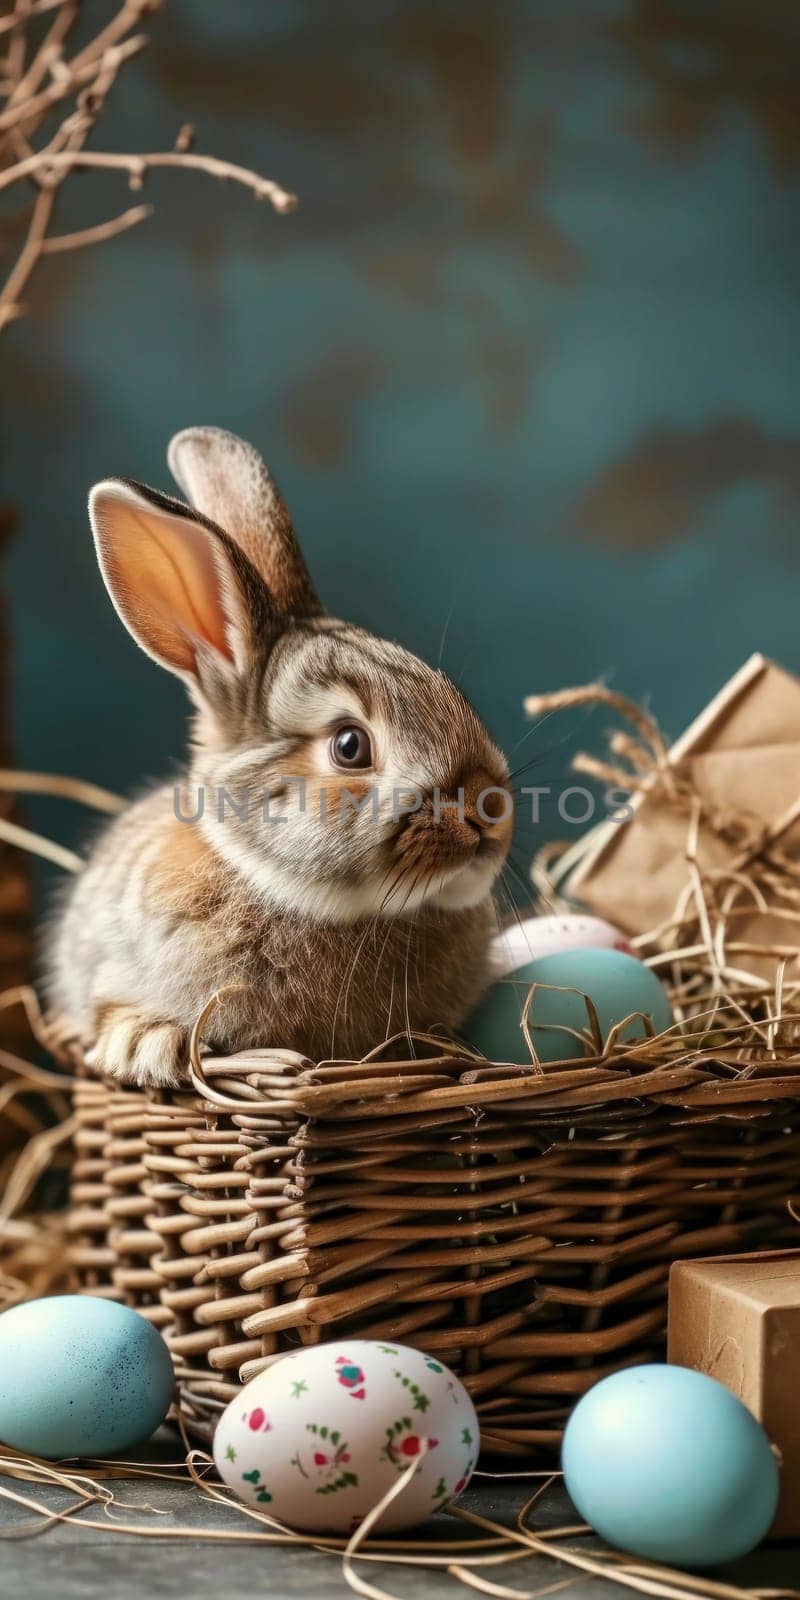 An adorable bunny nestled among dyed Easter eggs in a wicker basket